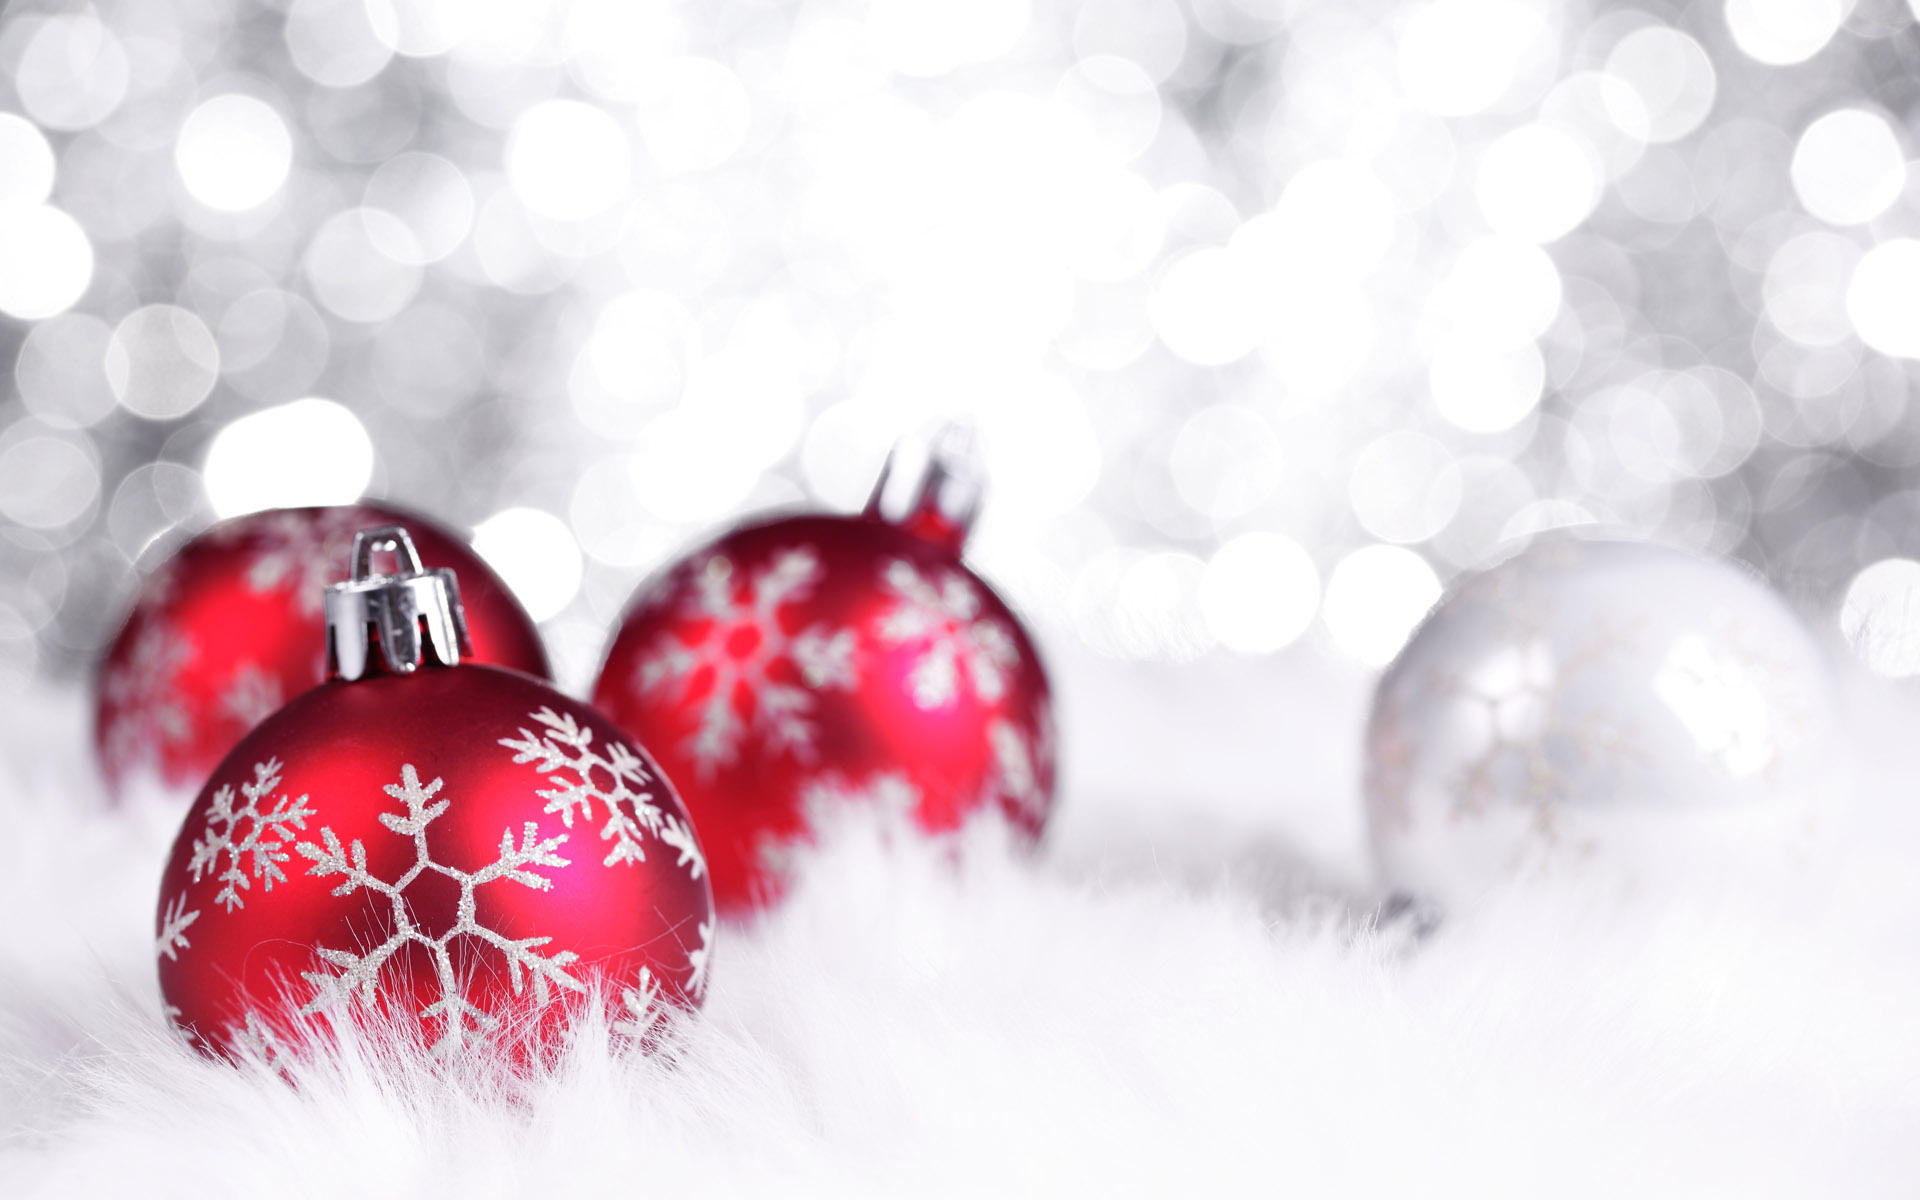 Christmas Backgrounds Free Download Wallpapers, Backgrounds